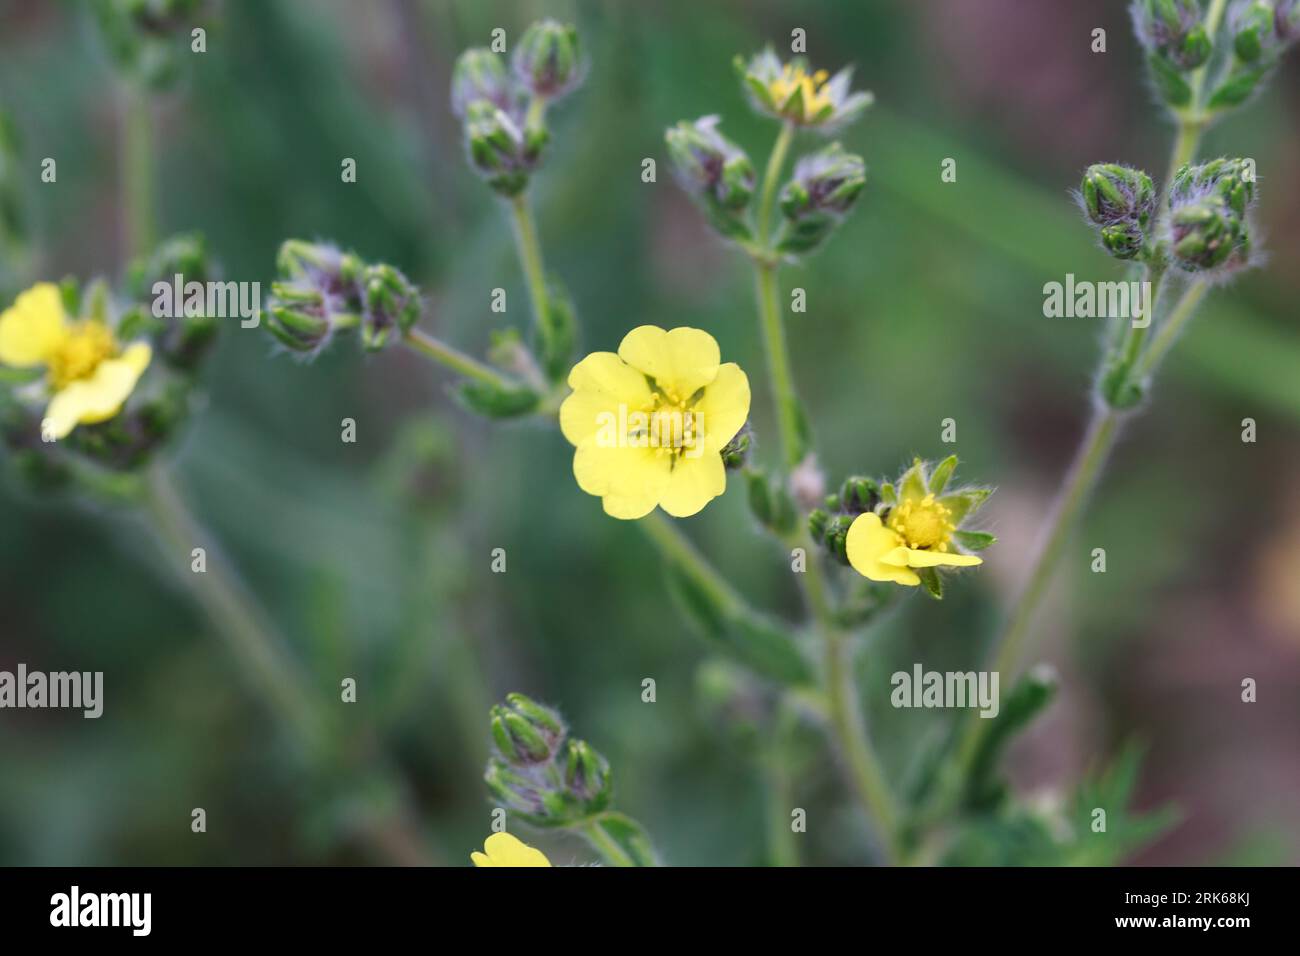 Silvery cinquefoil, Potentilla argentea. Yellow flowers. Perennial herbaceous plant species of the genus Potentilla of the Rosaceae family. Stock Photo